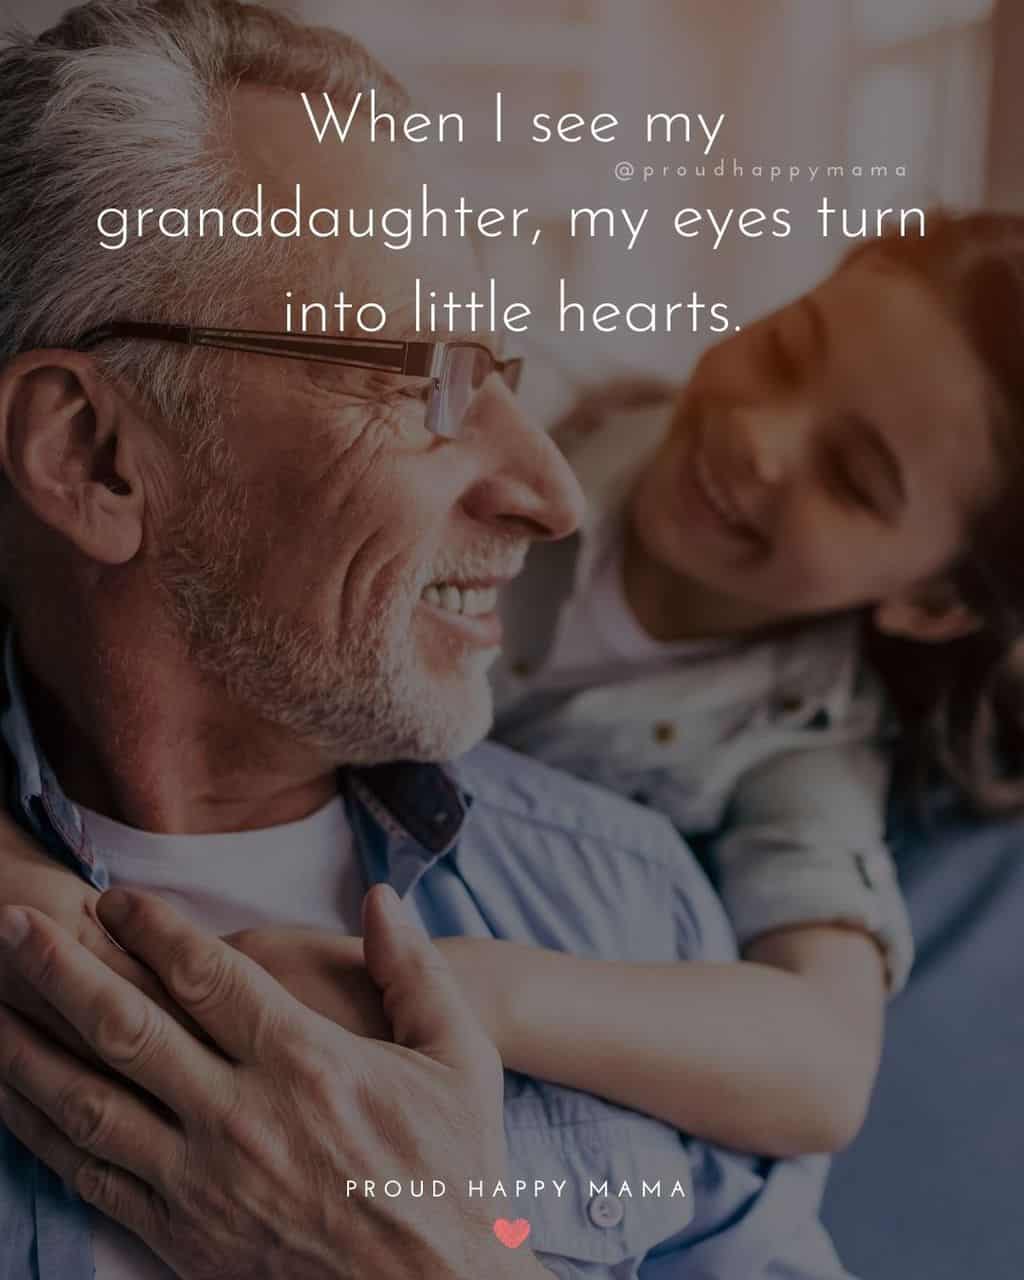 Granddaughter Quotes - When I see my granddaughter, my eyes turn into little hearts.